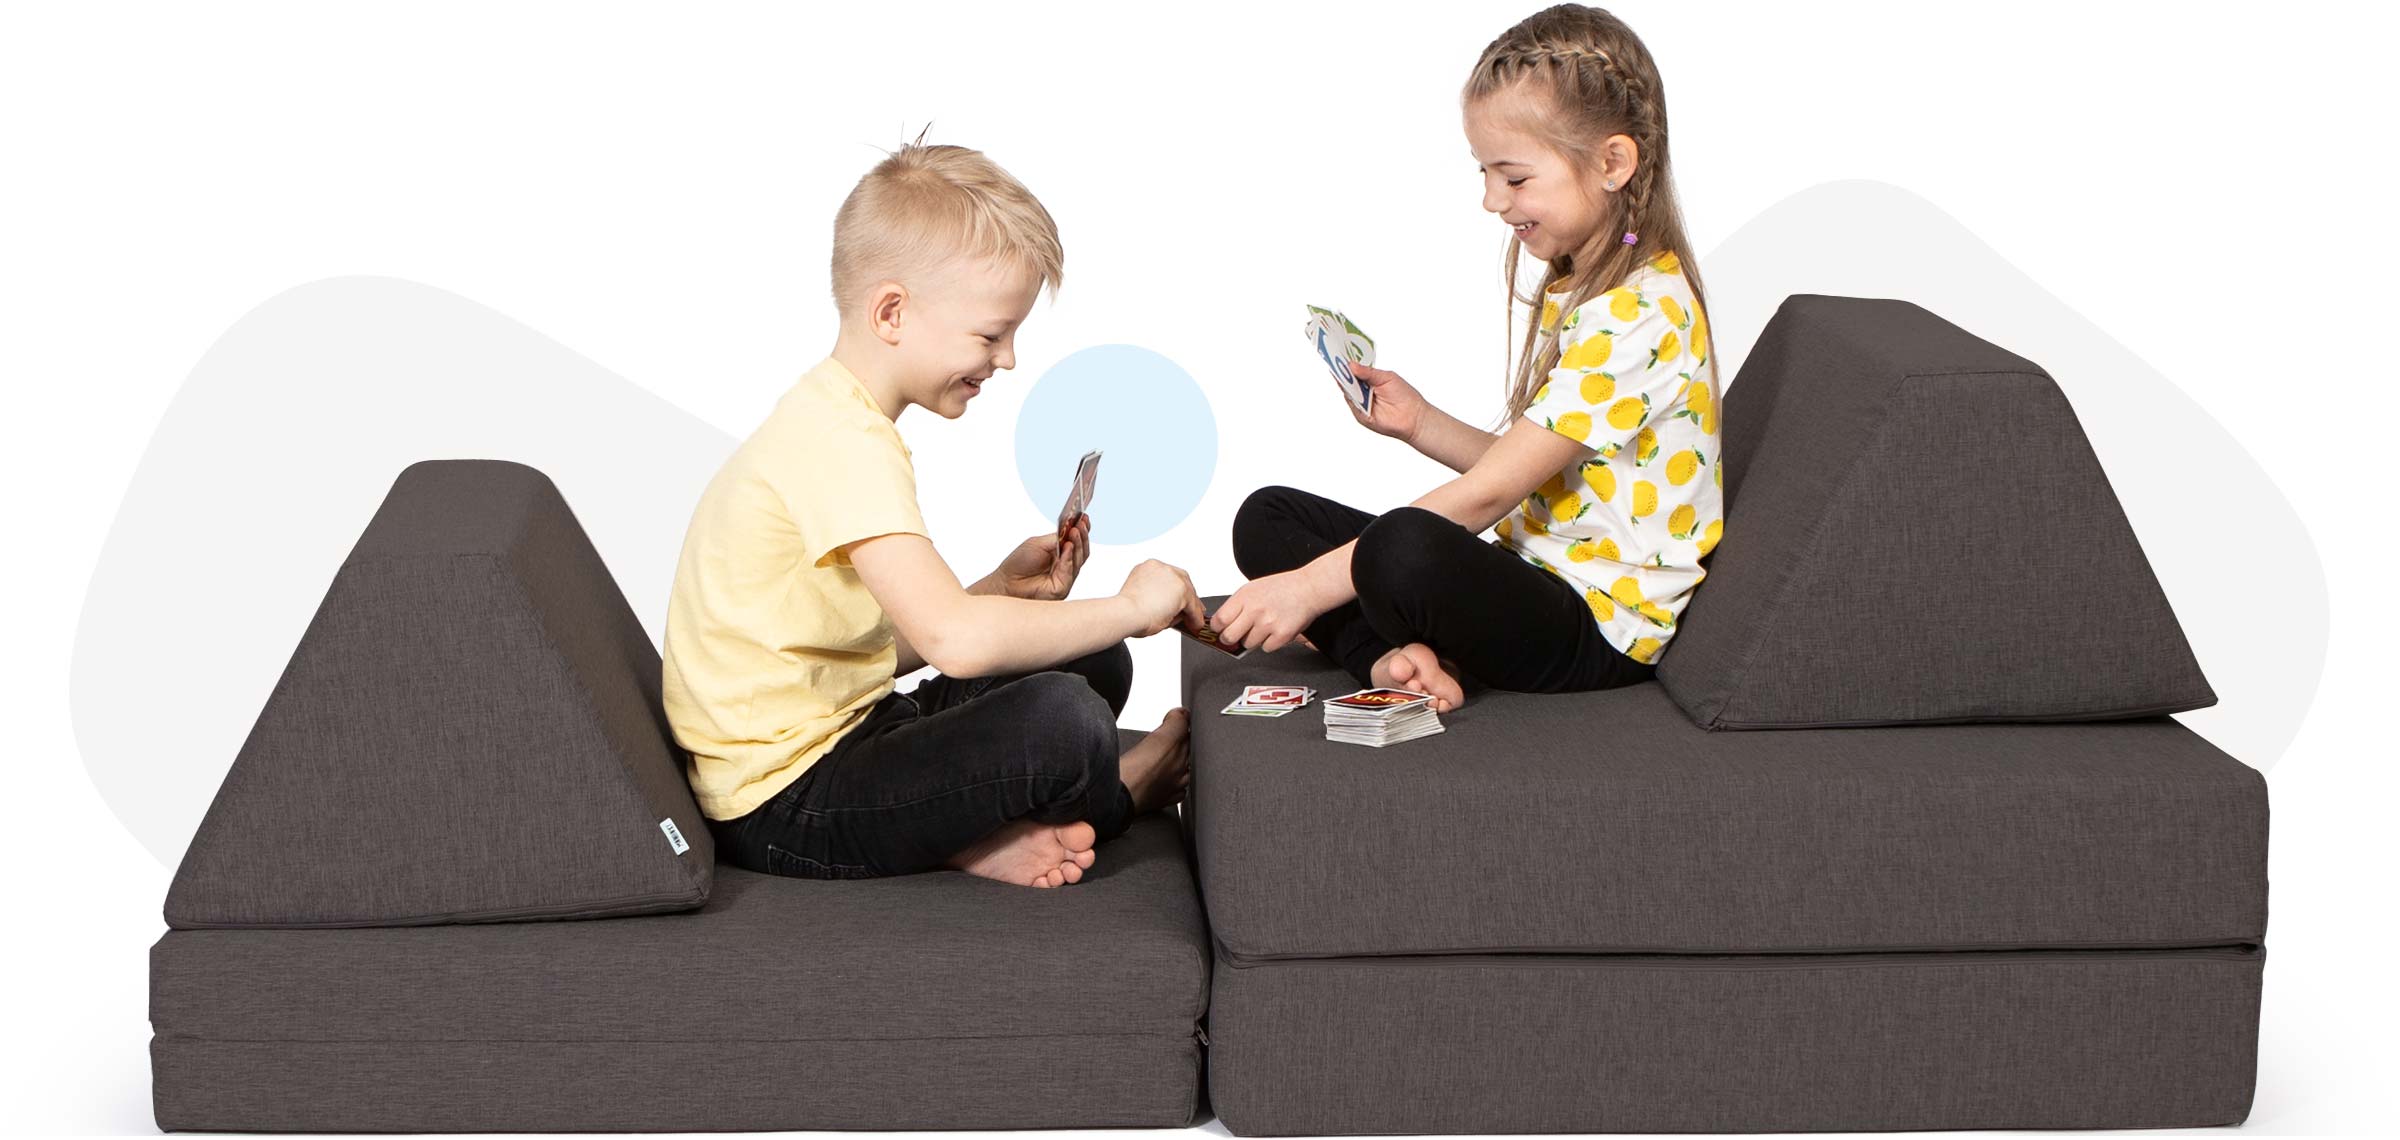 Kids sitting and playing cards on a dark brown Monboxy foam block set for kids